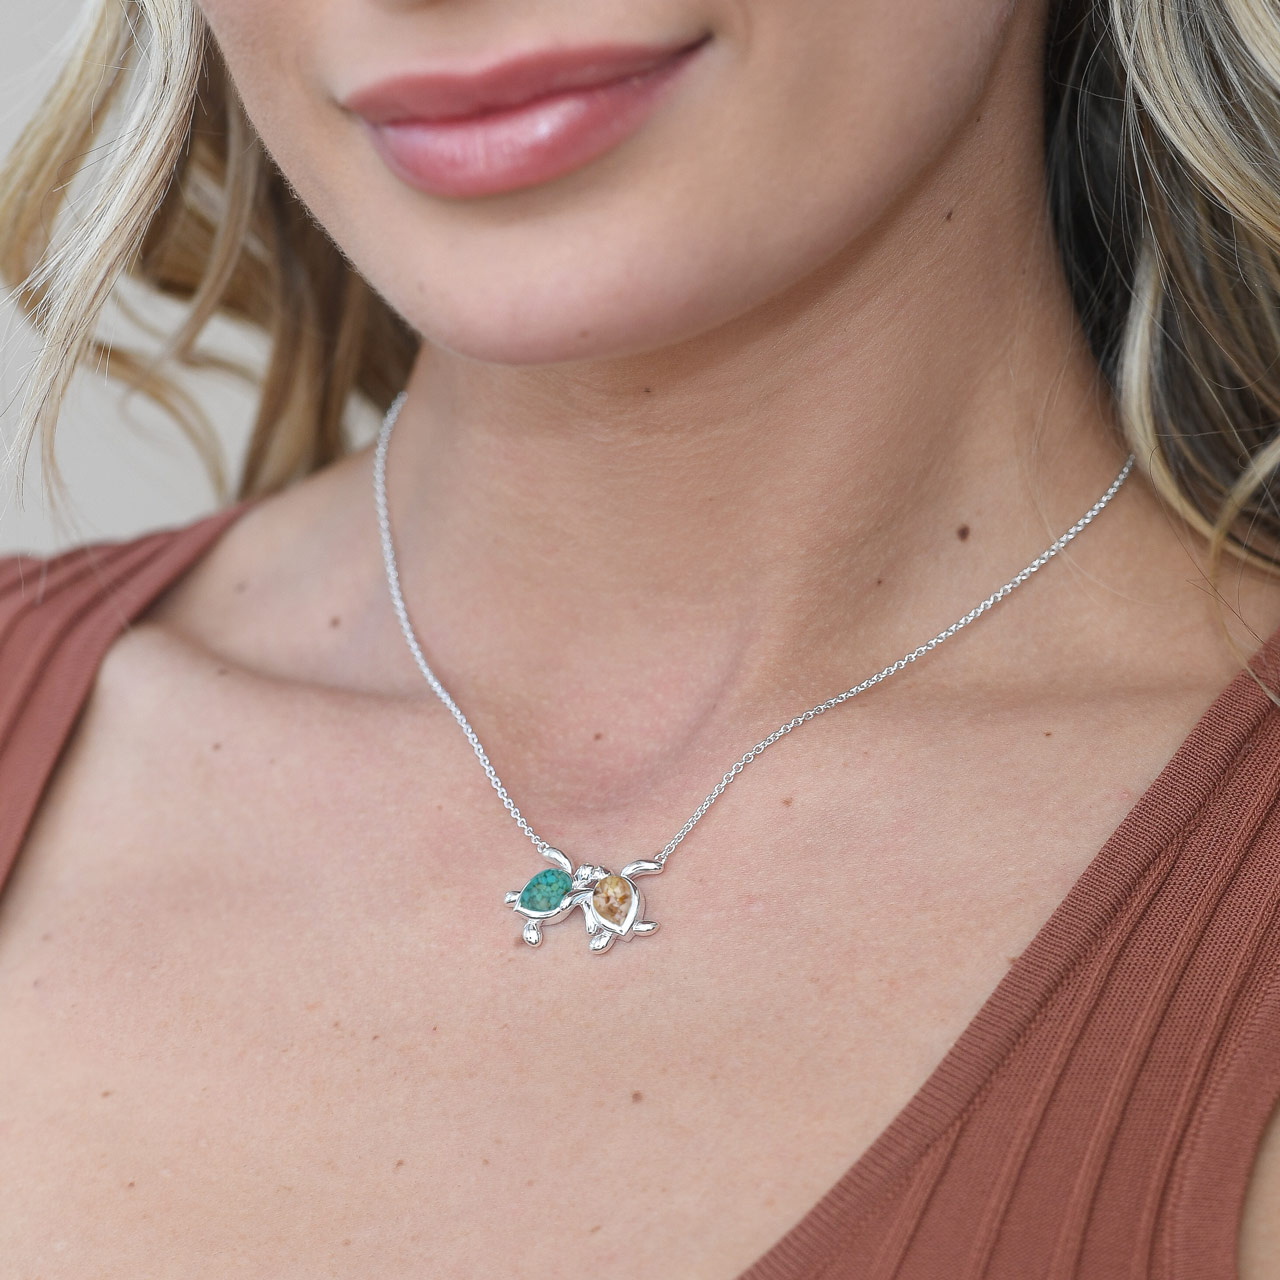 Best Friends Turtle Necklace - Turquoise and Shells of Hawaii